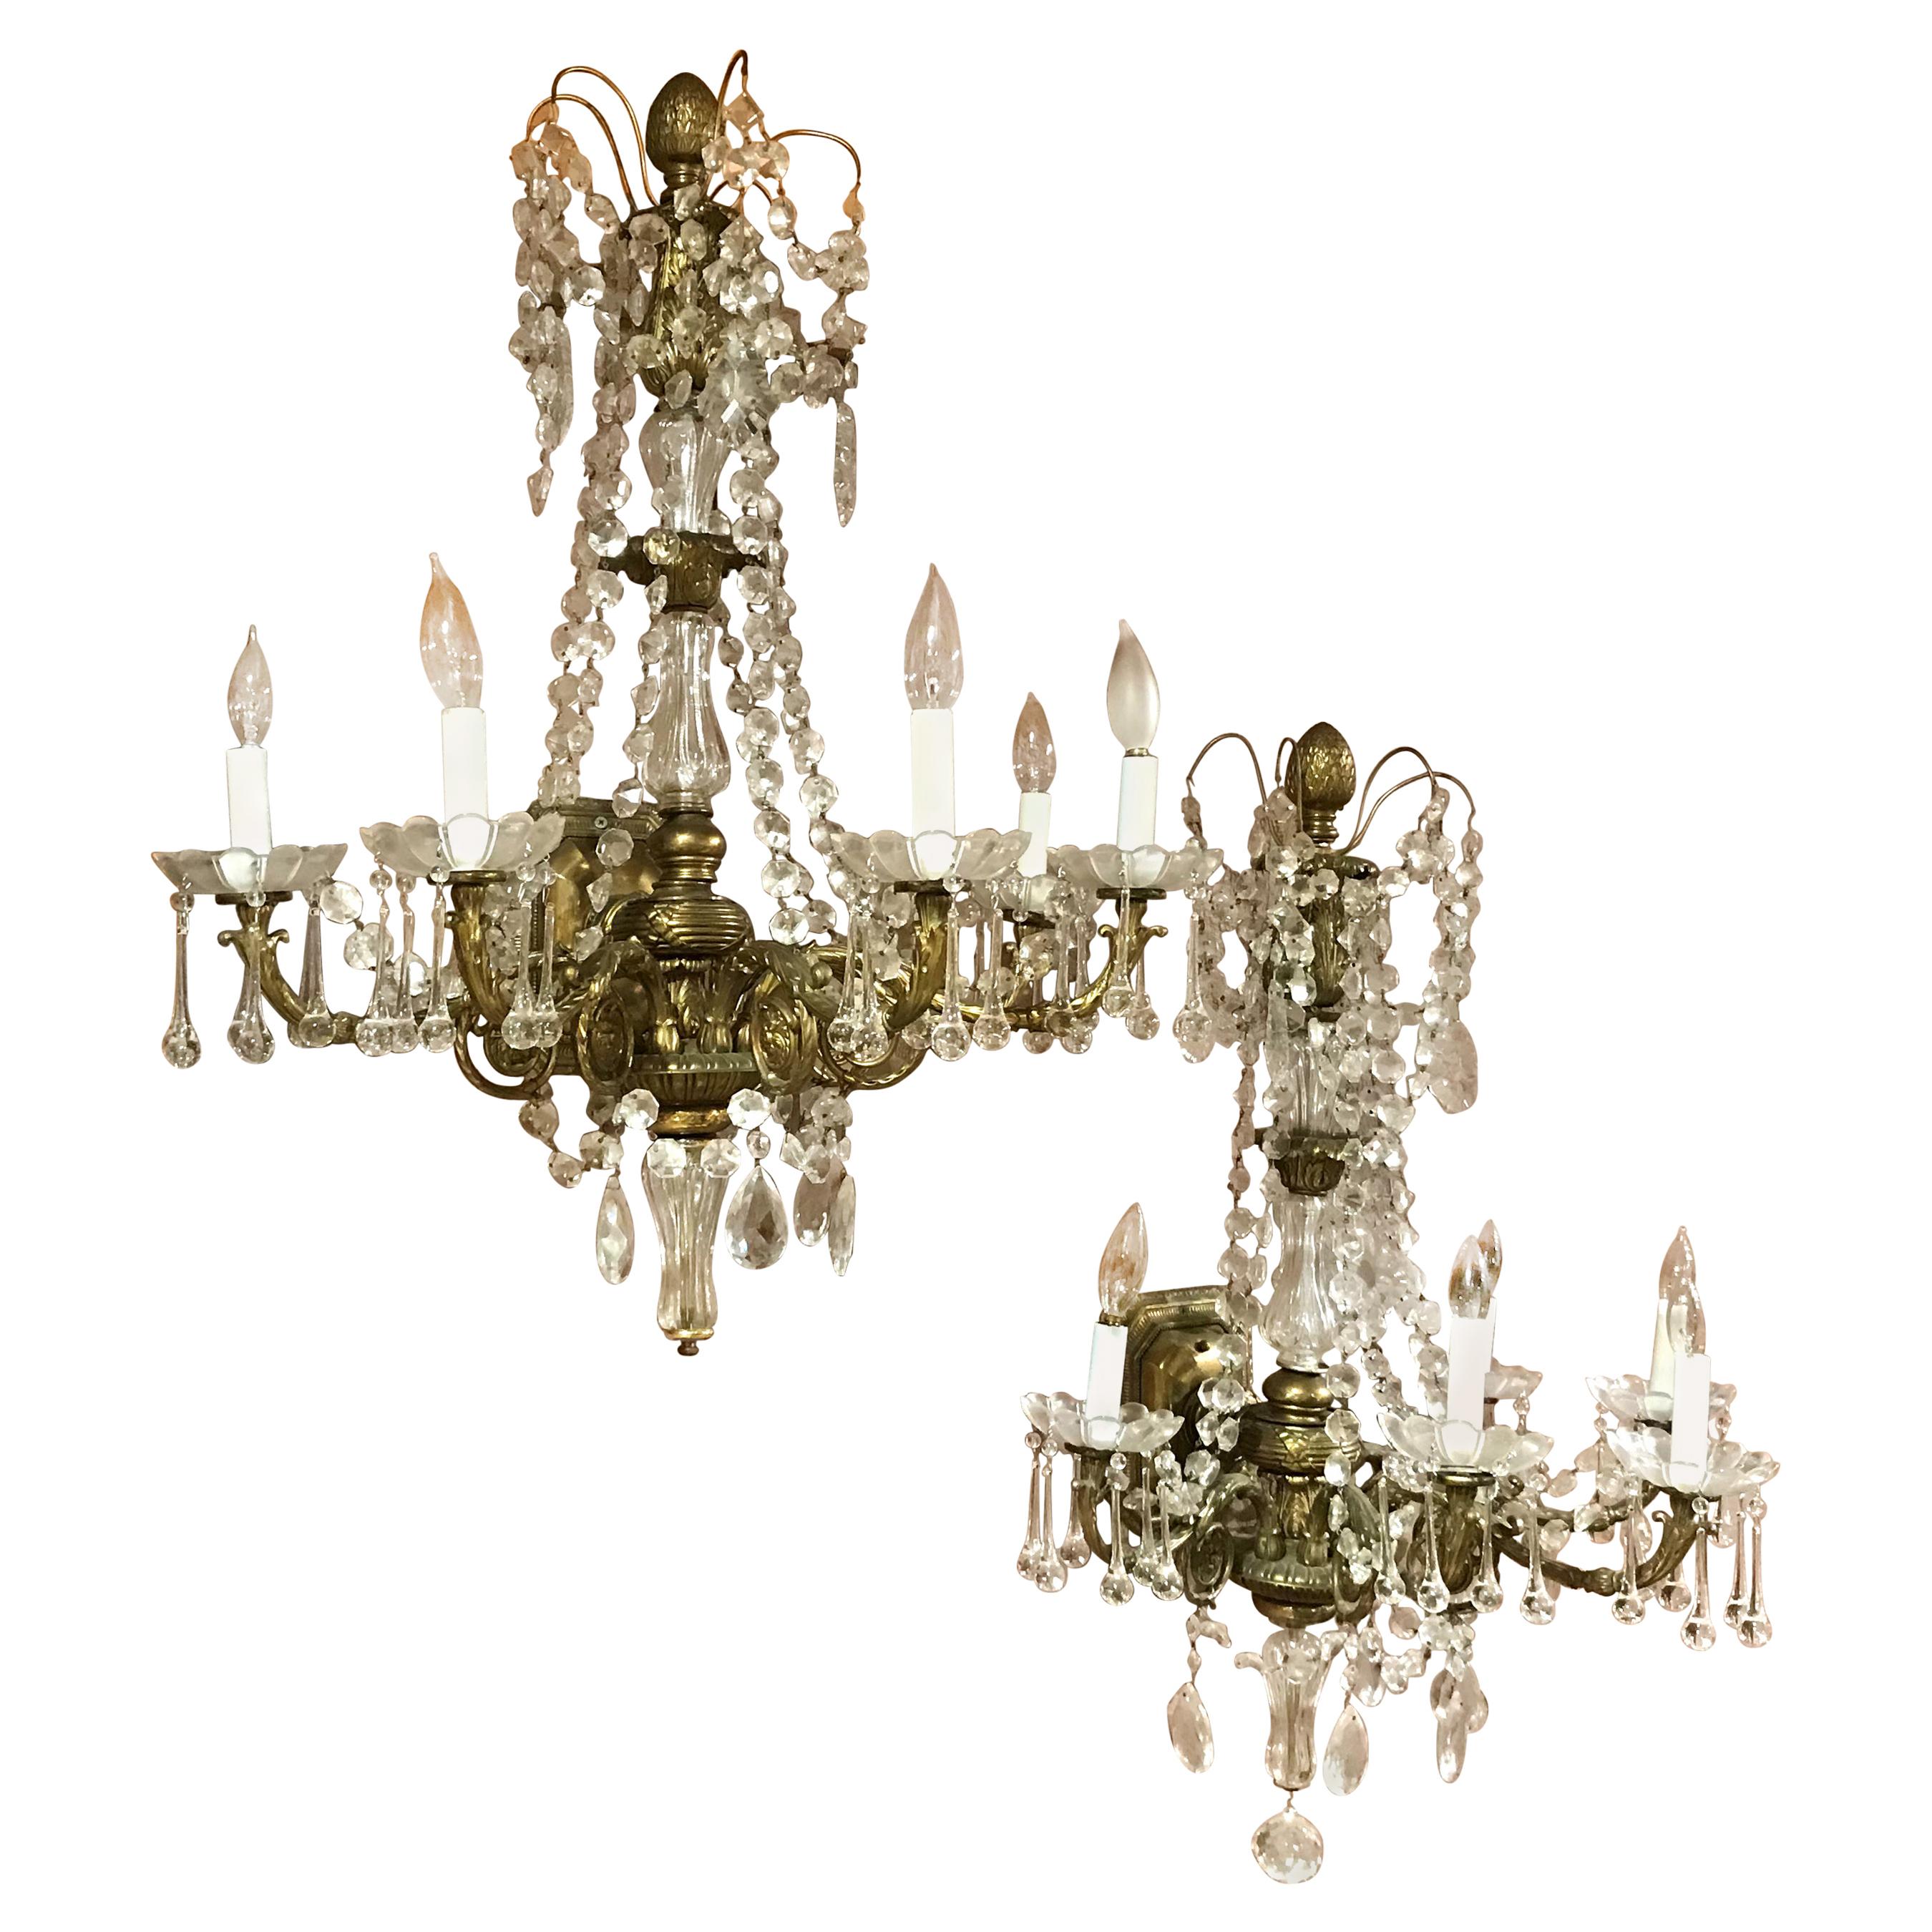 Pair of Gilt Bronze & Crystal Palace Five-Light Sconces For Sale